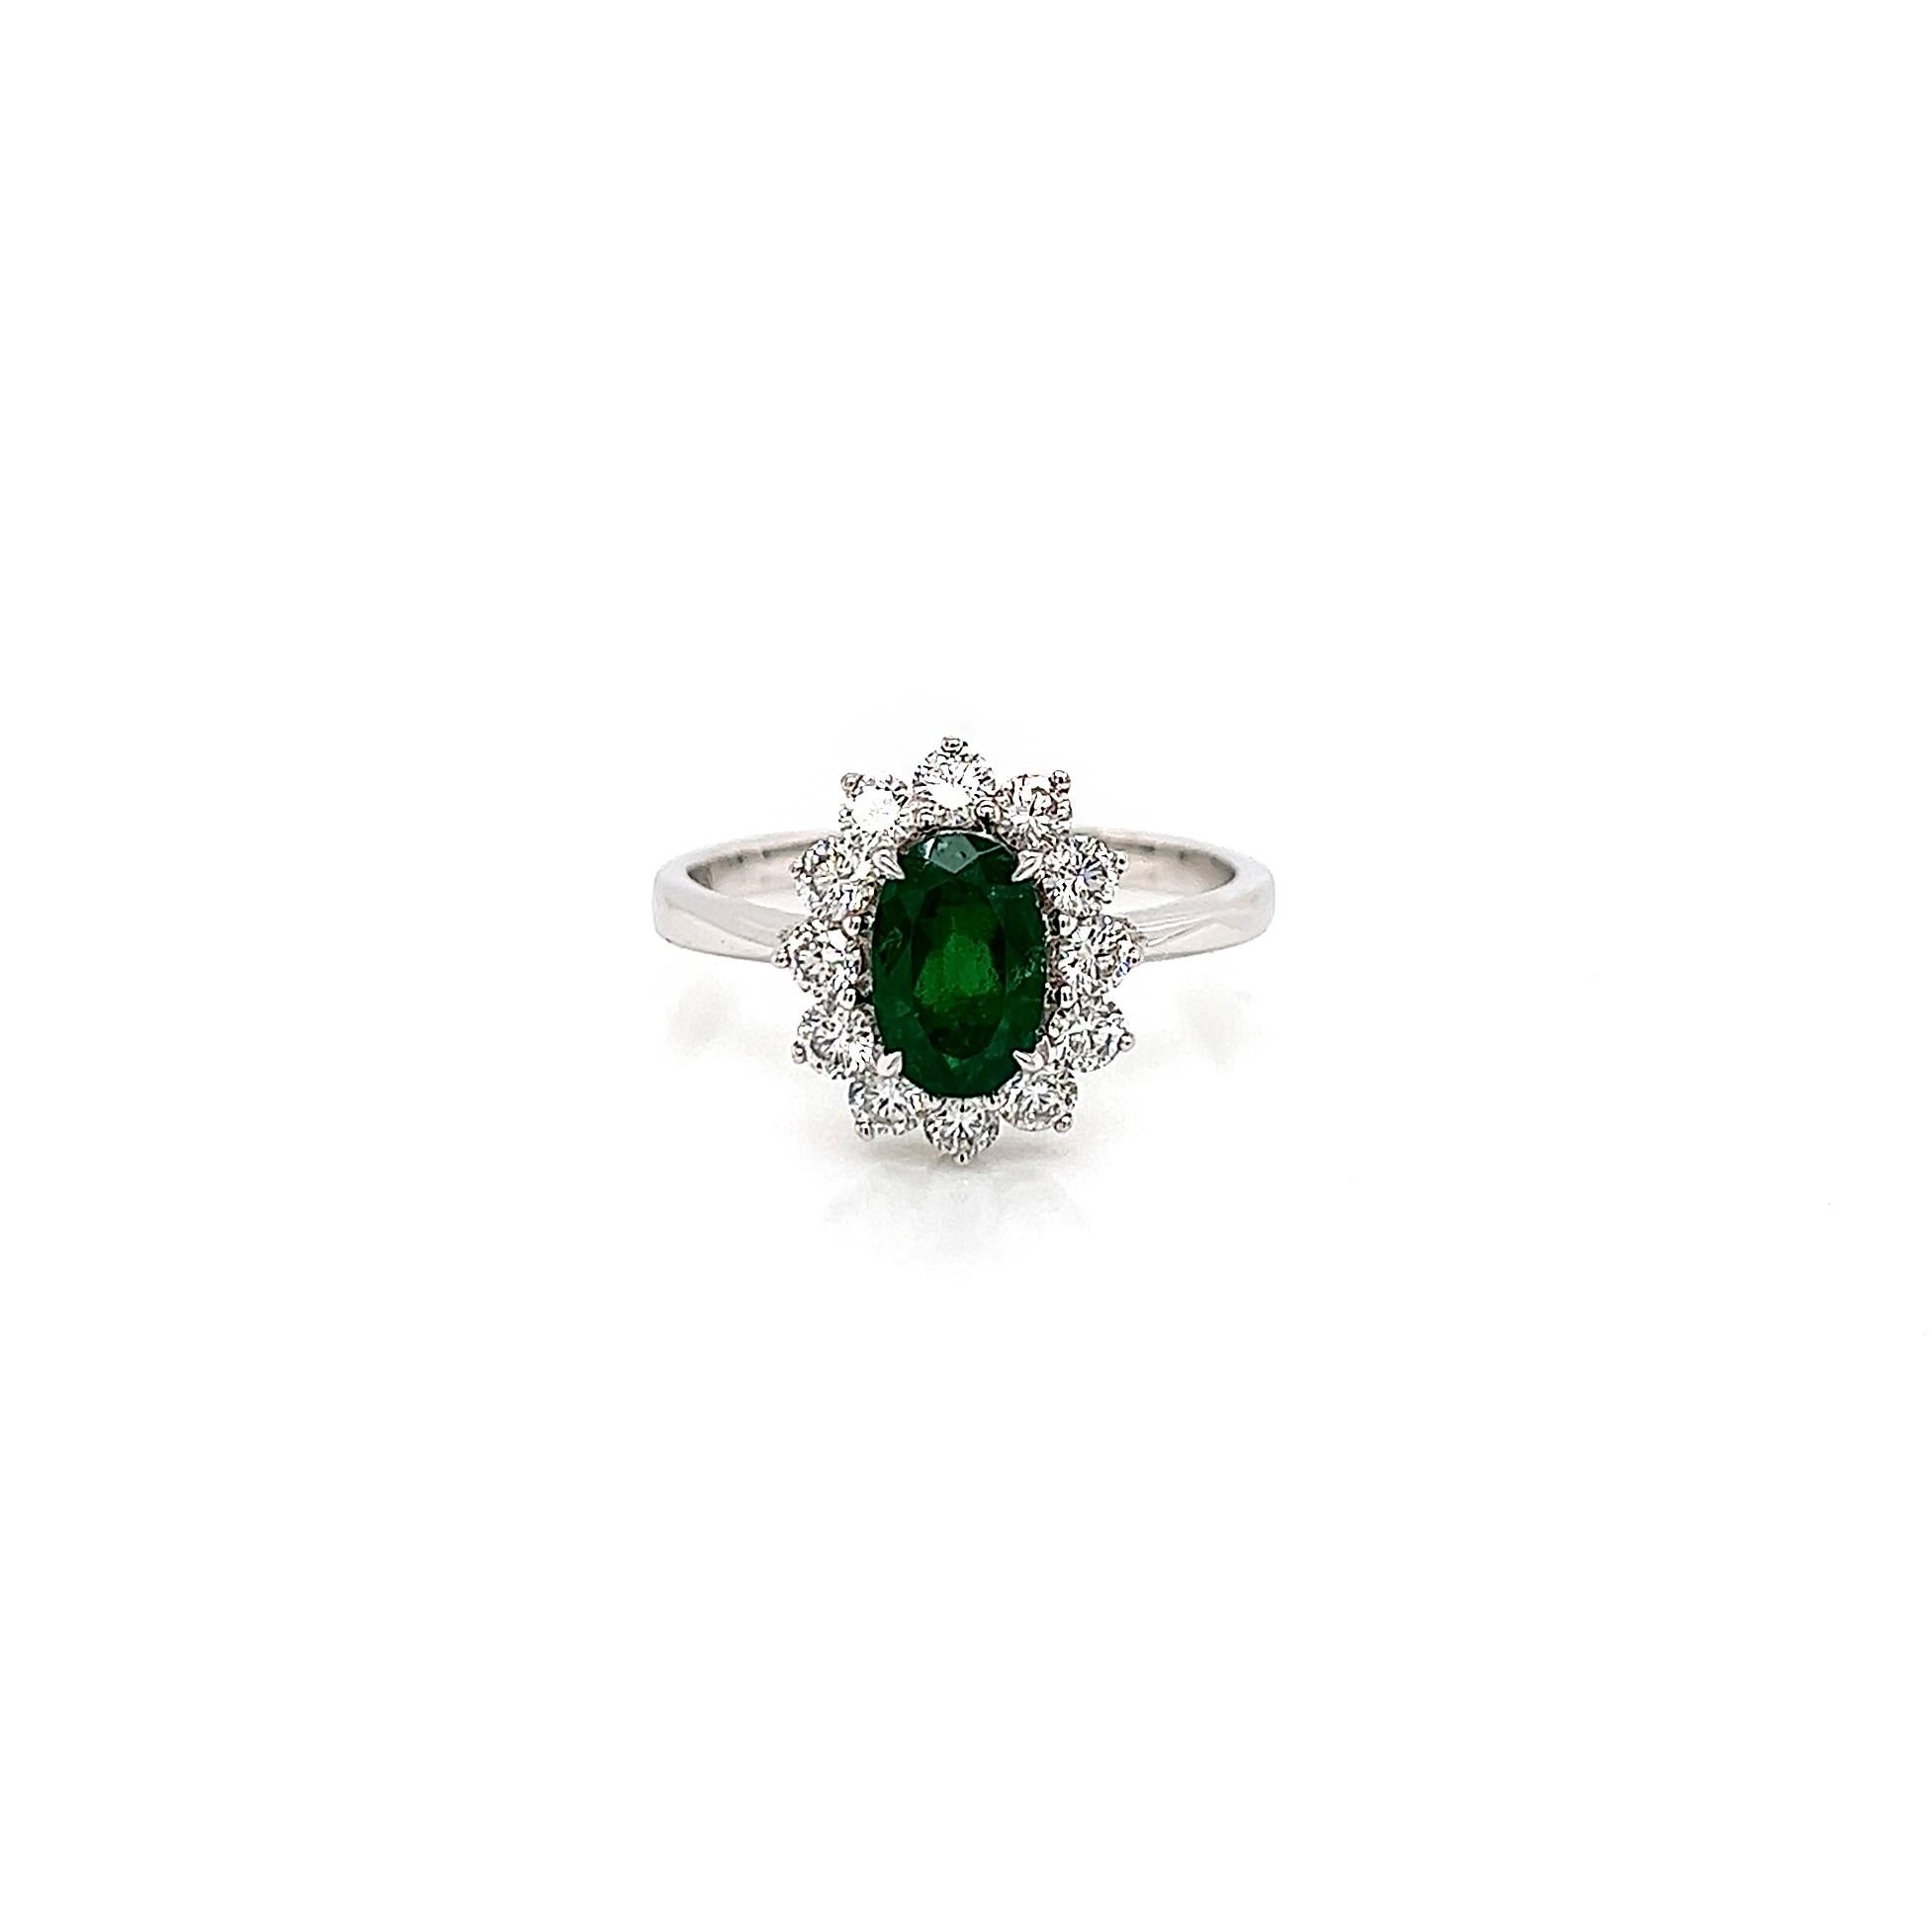 1.59 Carat Green Emerald and Diamond Ladies Ring

-Metal Type: 18K White Gold
-0.95 Carat Oval Cut Columbian Green Emerald
-0.64 Carat Round Natural Diamonds, F-G Color, VS-SI Clarity
-Size 7.0

Made in New York City